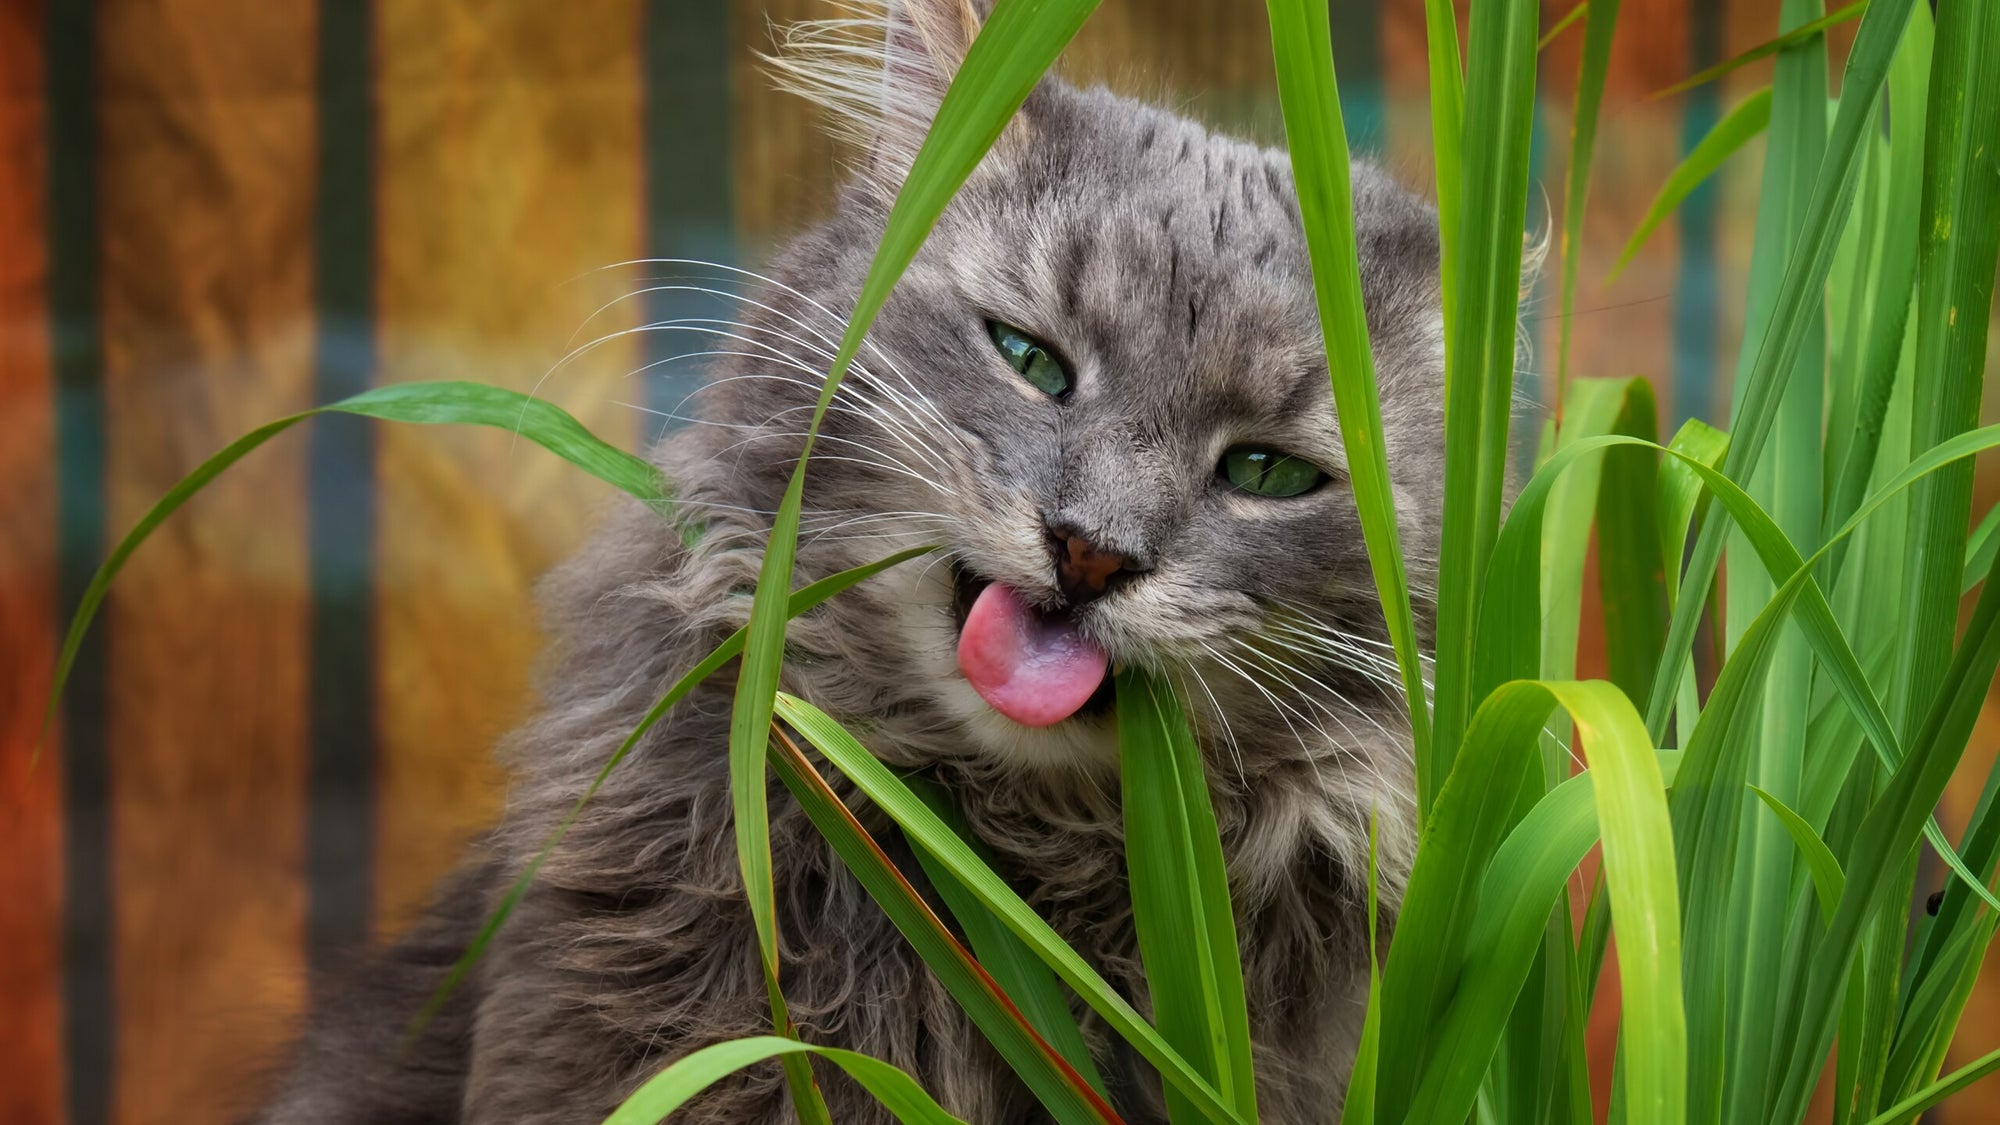 Long-haired gray tabby cat eating cat grass. 